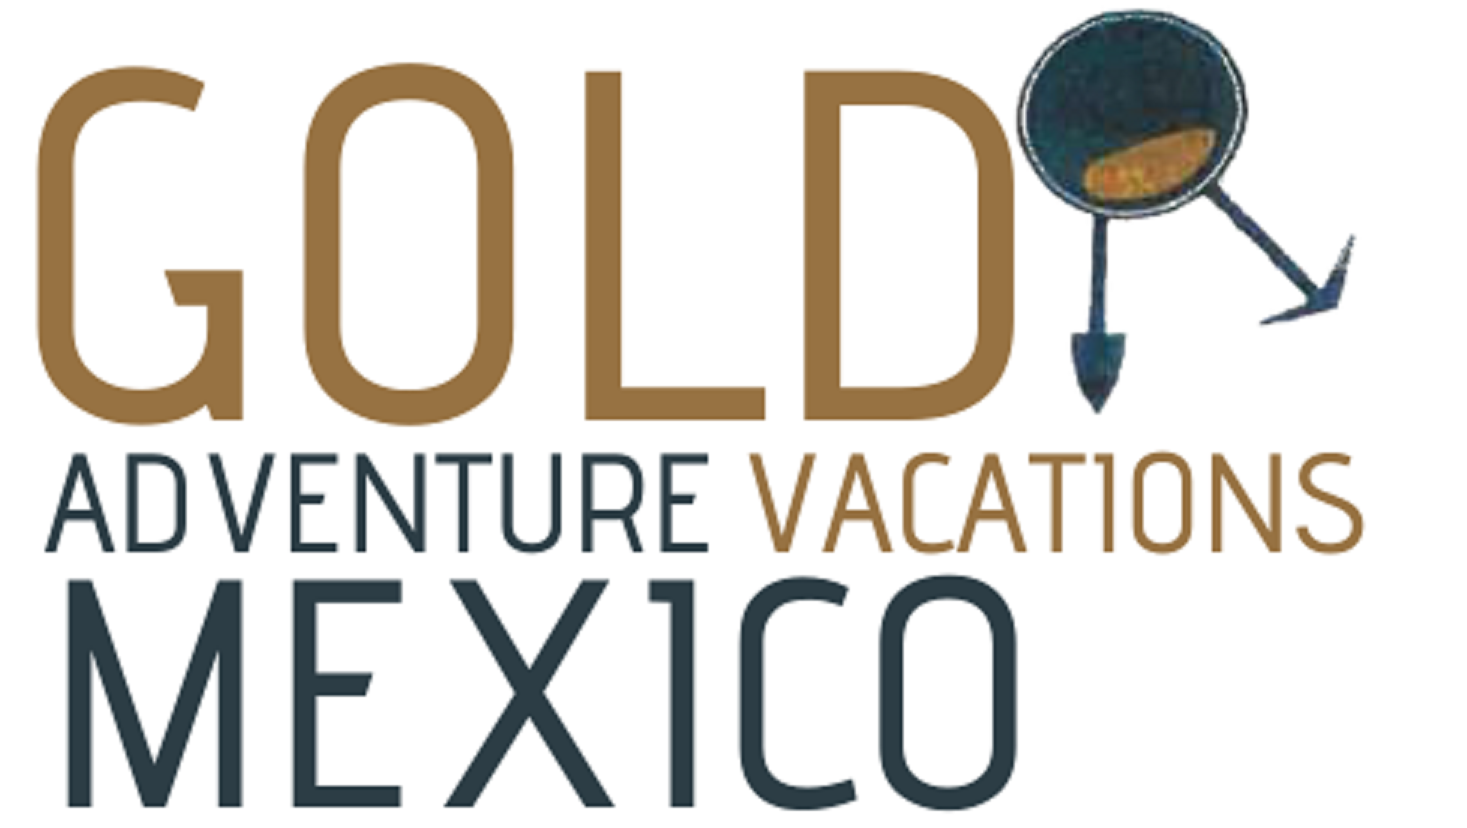 Gold Adventure Vacations Mexico in Lubbock, TX (806) 500